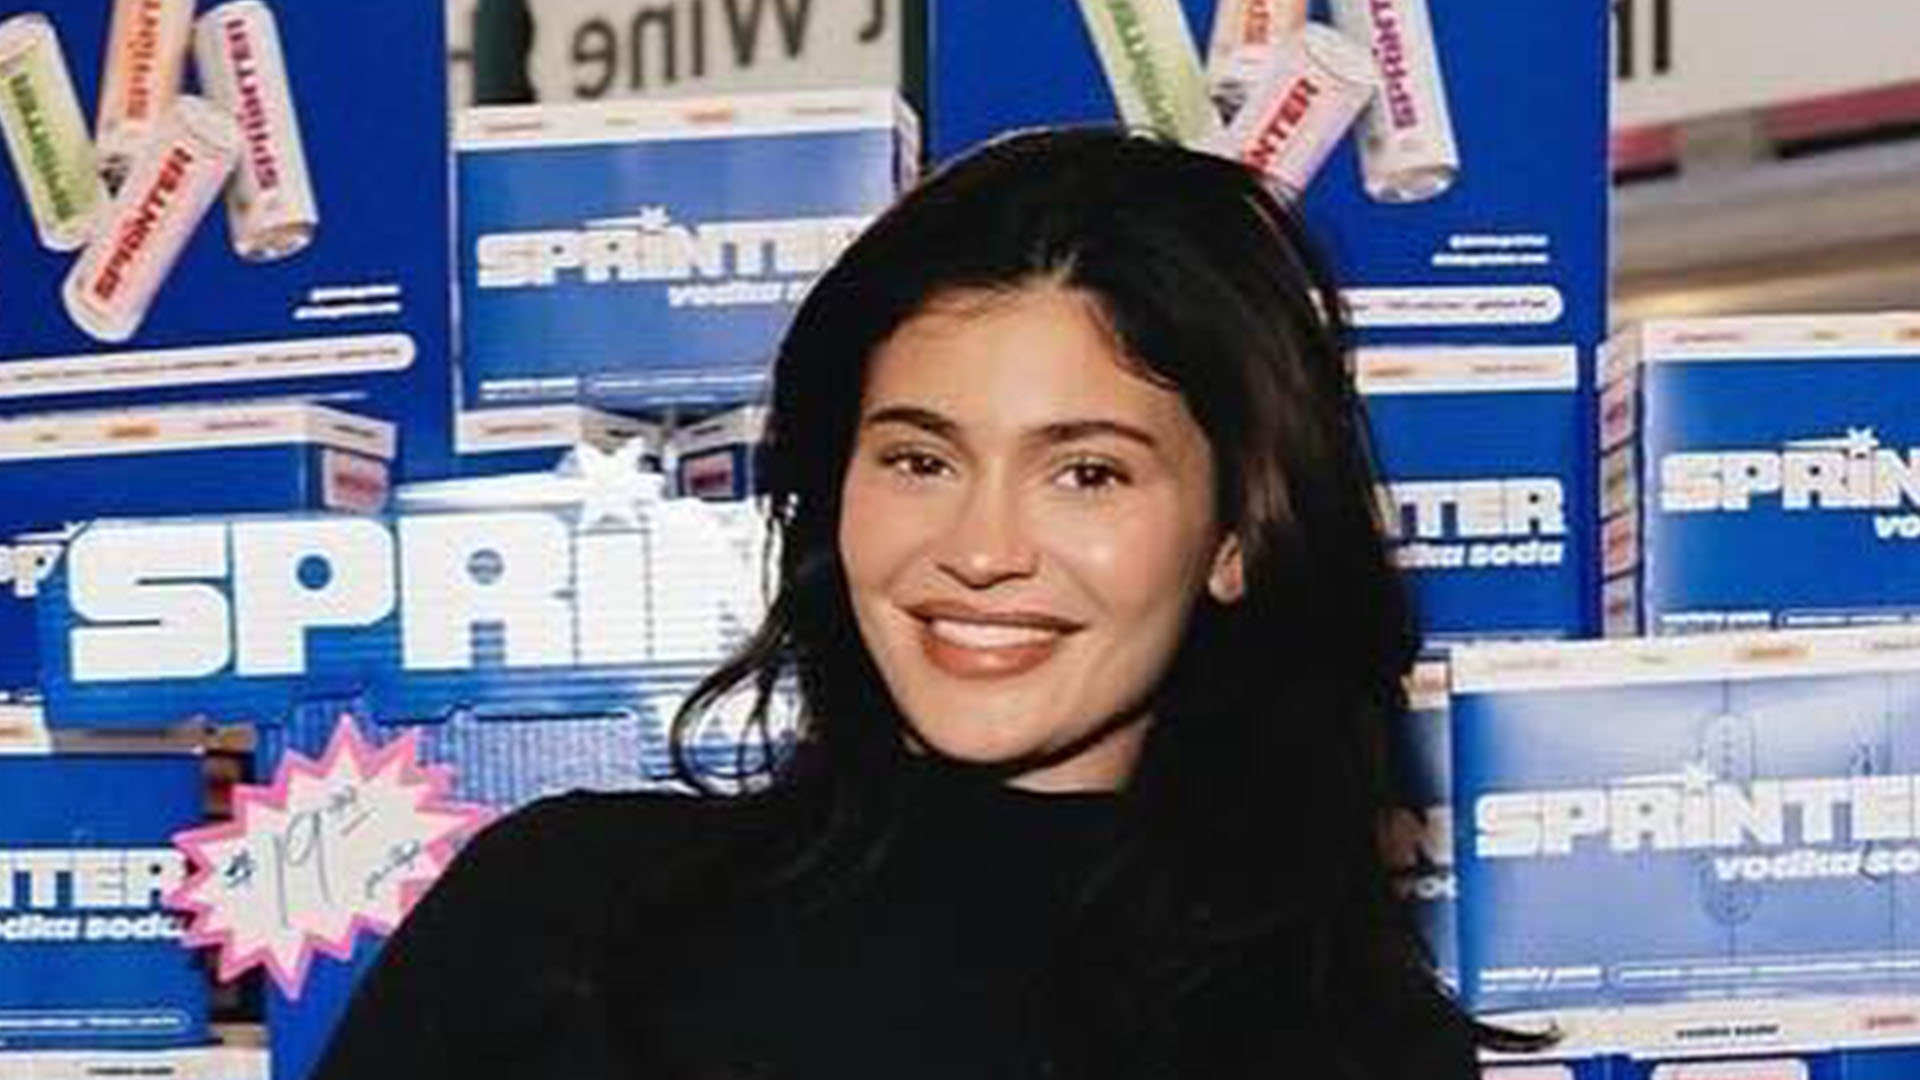 Kylie Jenner mistaken for a ‘cardboard cutout while promoting her new Sprinter vodka soda line at Total Wine & More [Video]